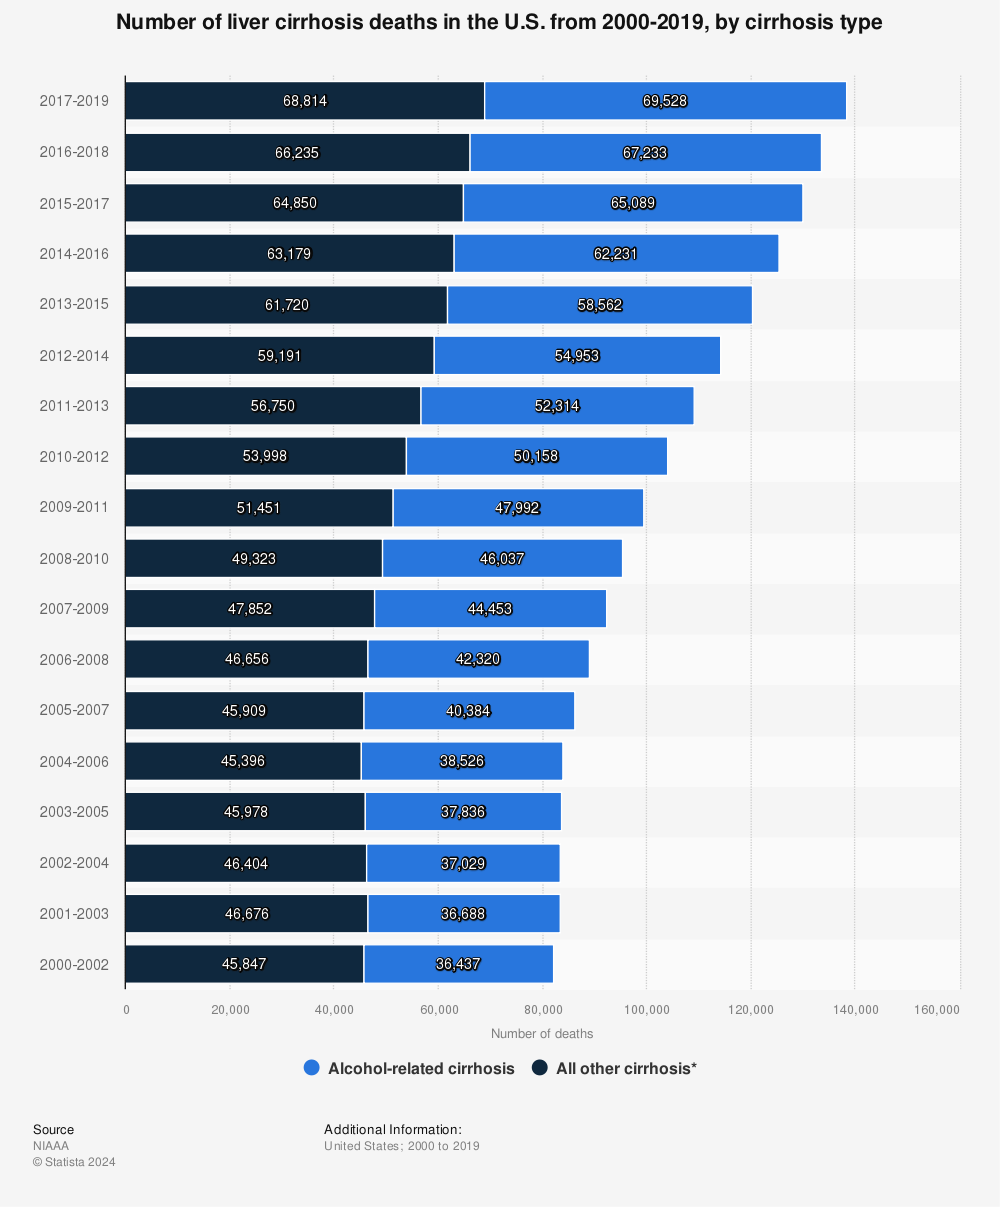 Statistic: Number of liver cirrhosis deaths in the U.S. from 2000-2019, by cirrhosis type | Statista